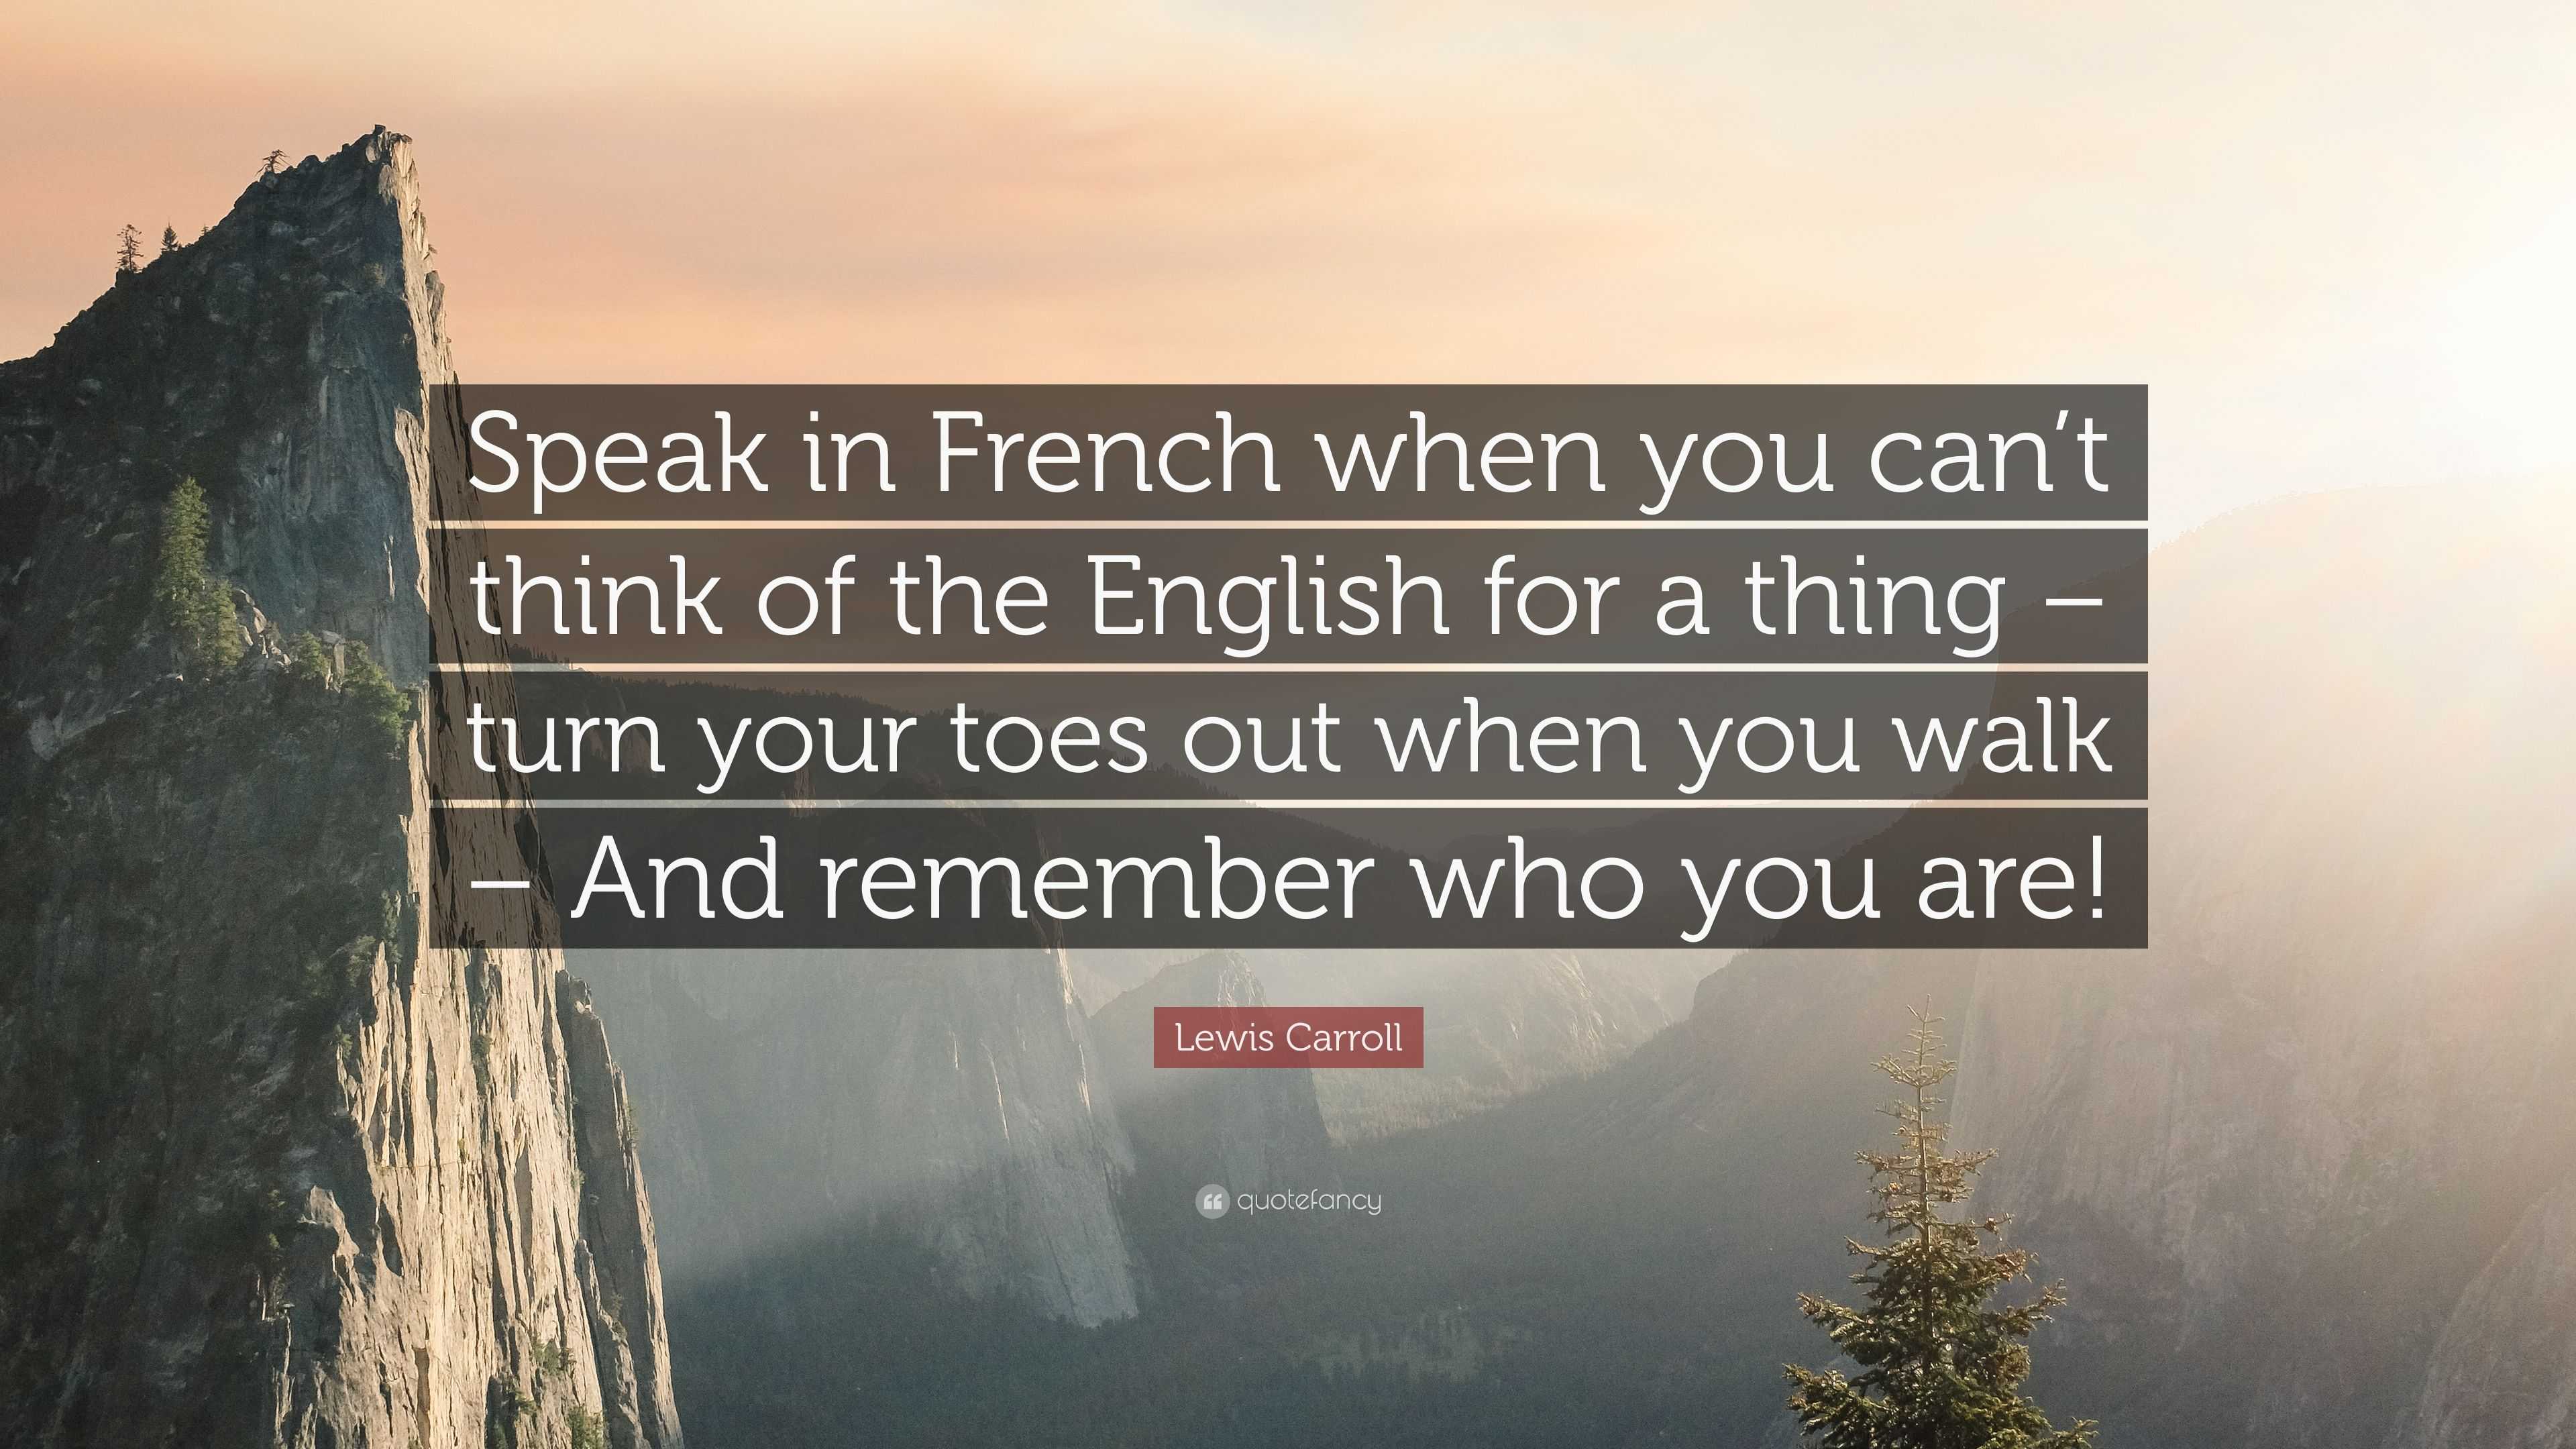 Lewis Carroll Quote: “Speak in French when you can’t think of the ...